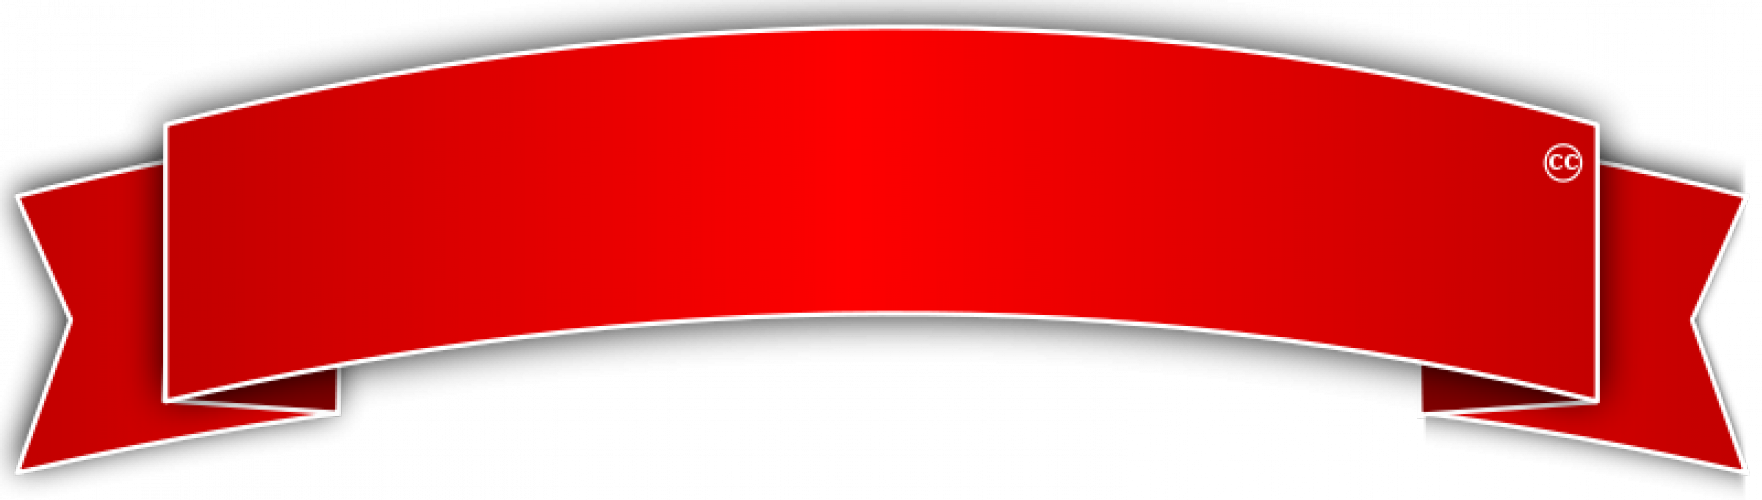 Blank Red Banner